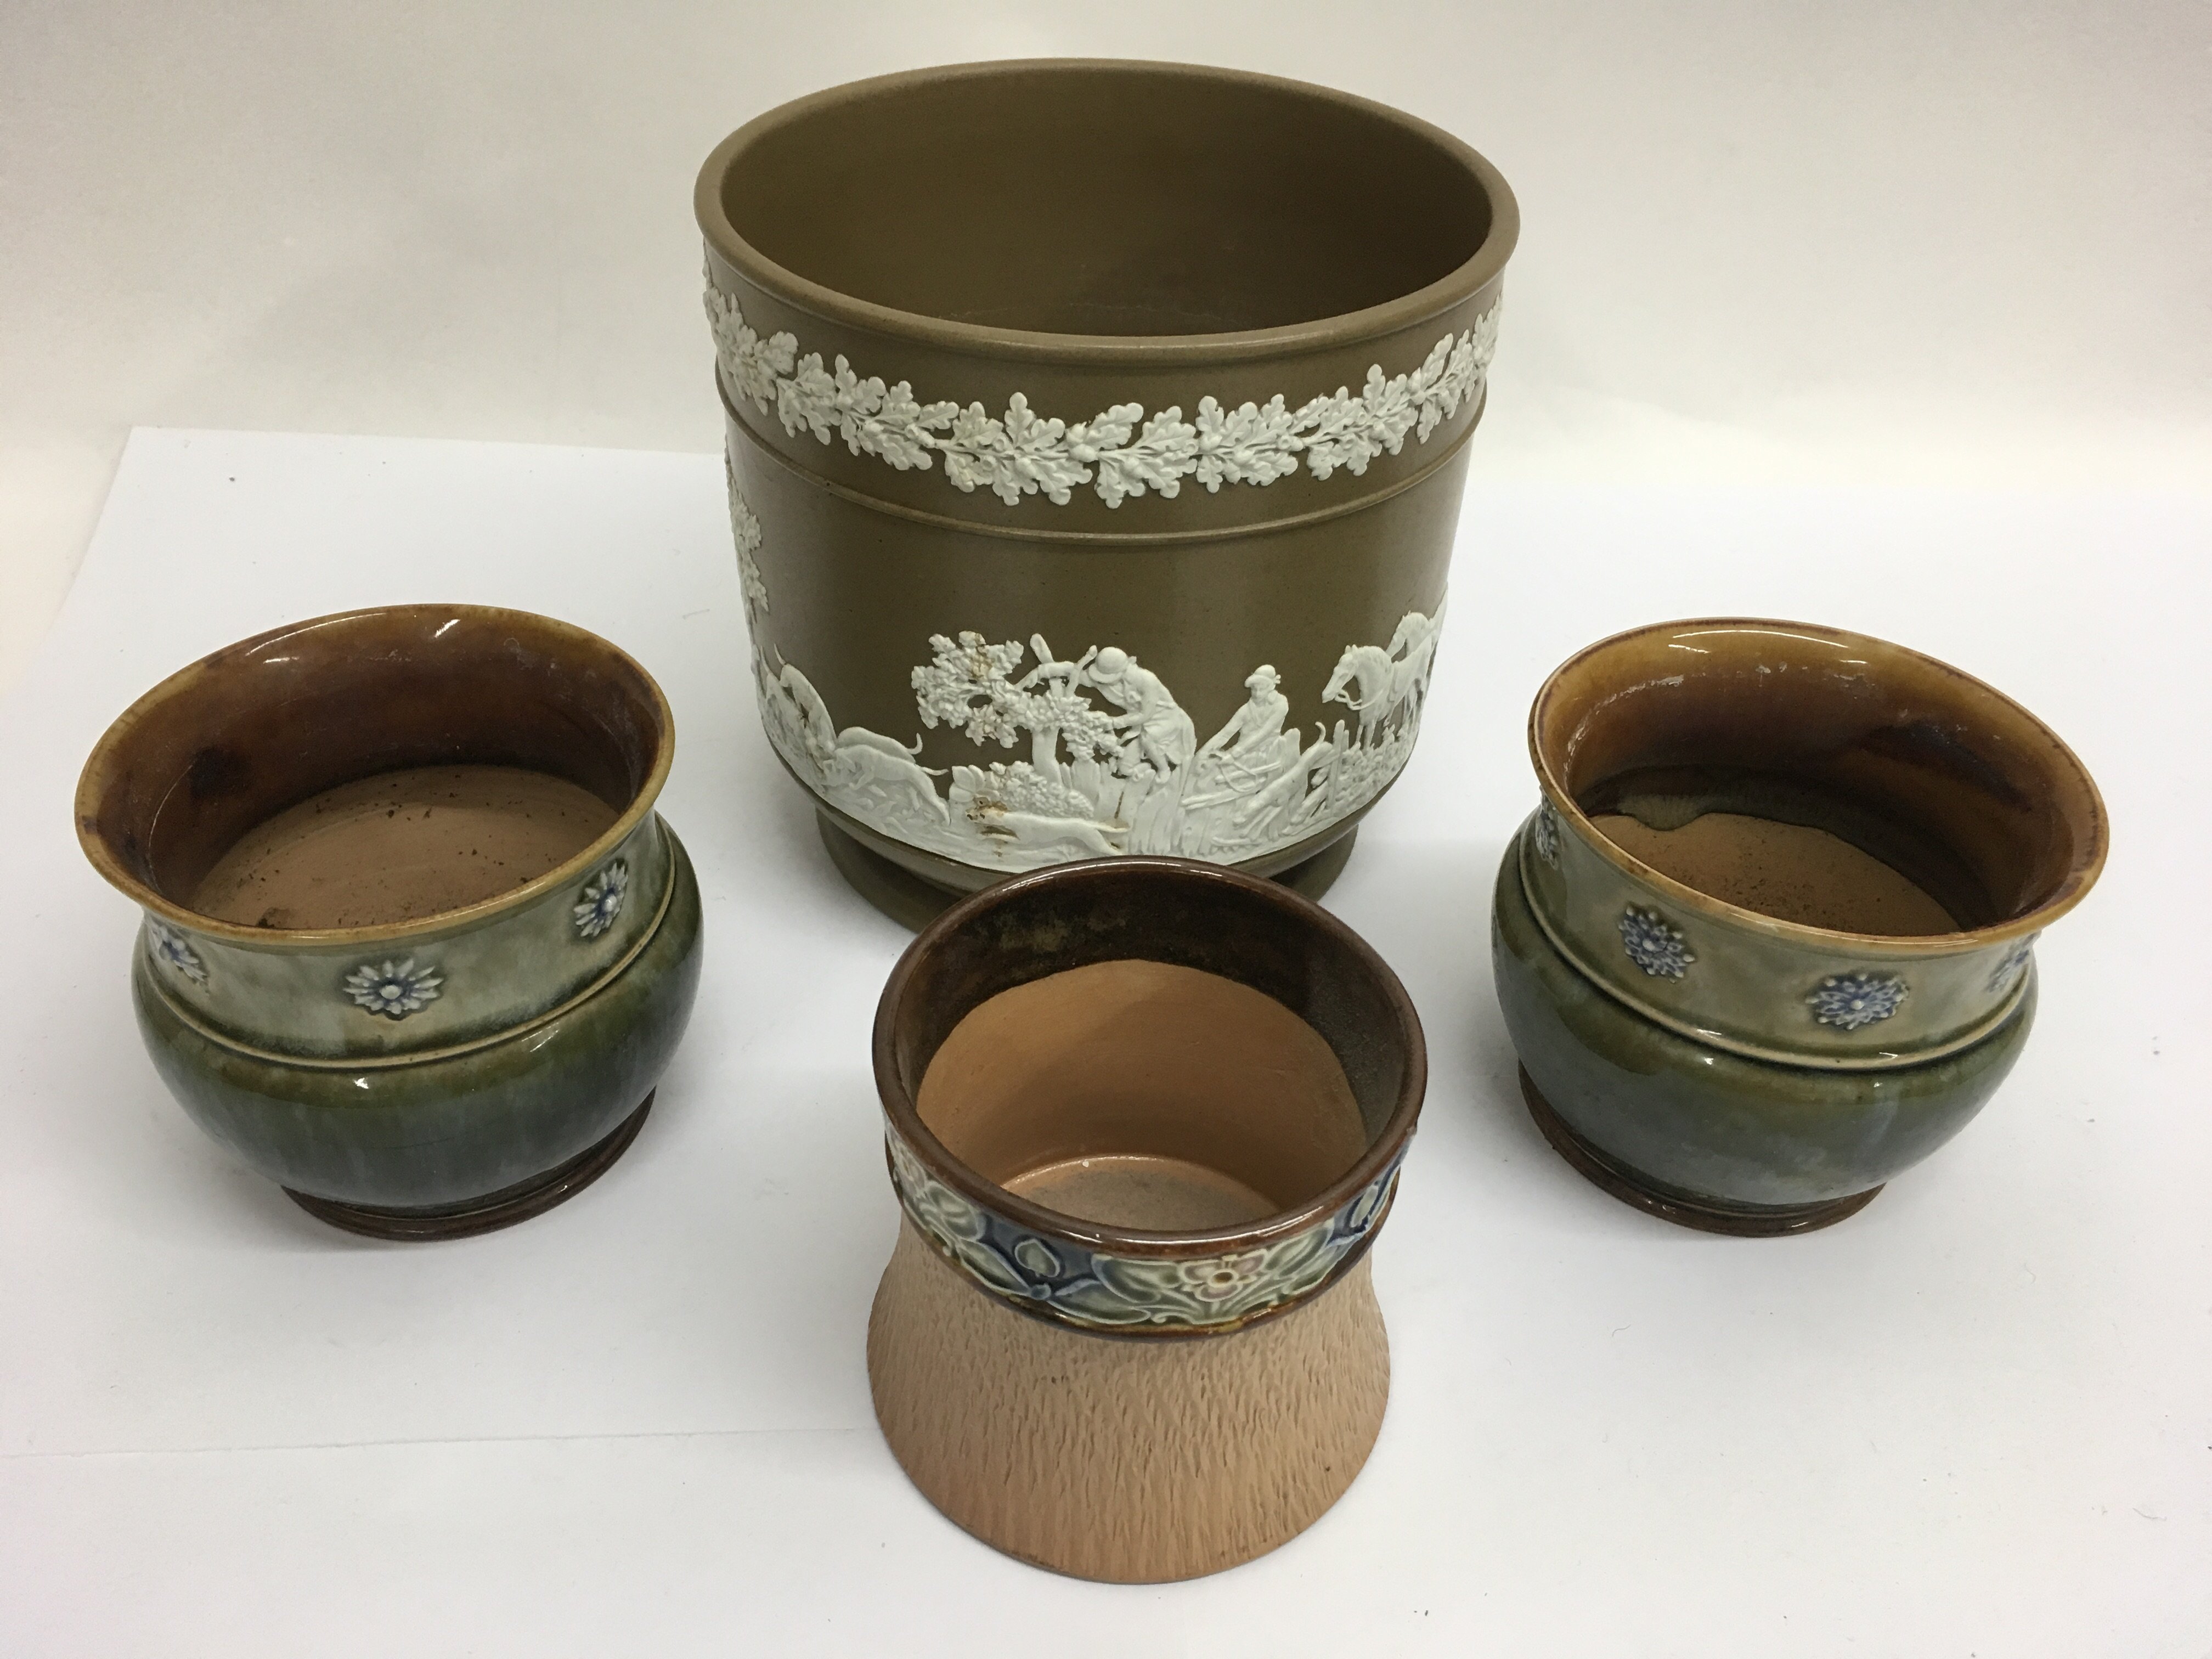 A Wedgwood style jardiniere and three Doulton plan